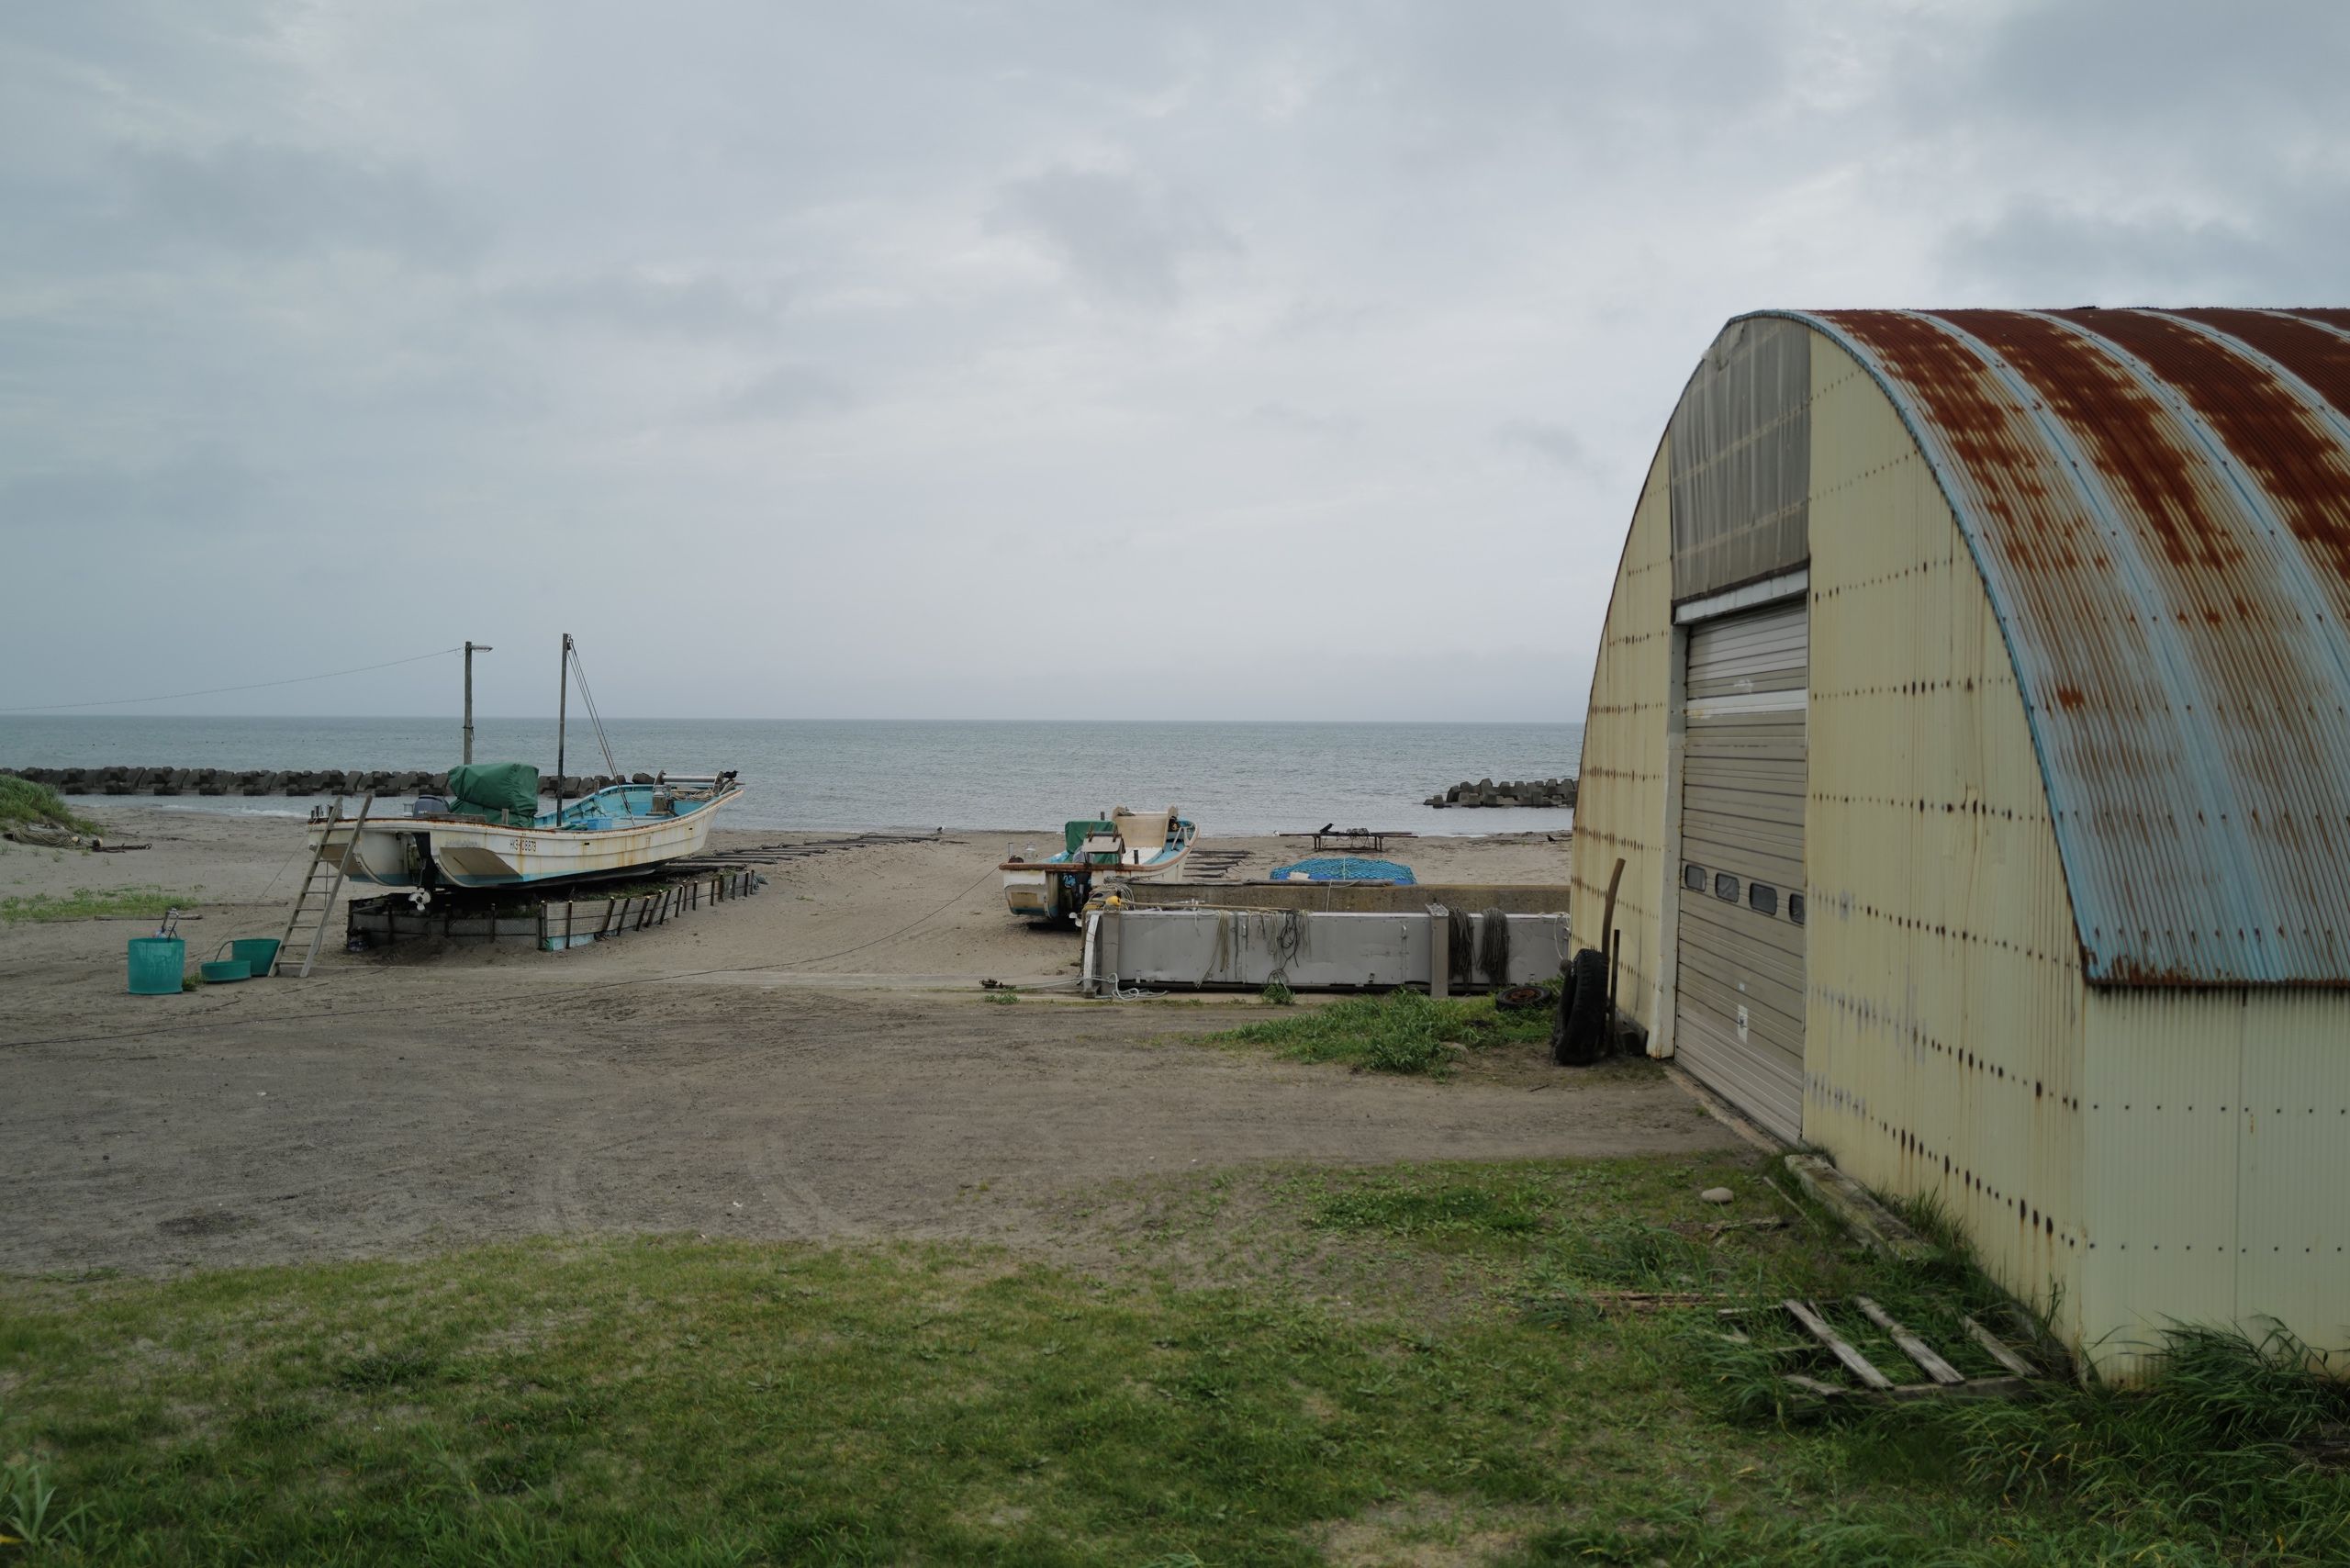 Fishing boats and a hangar on the shore in a village.